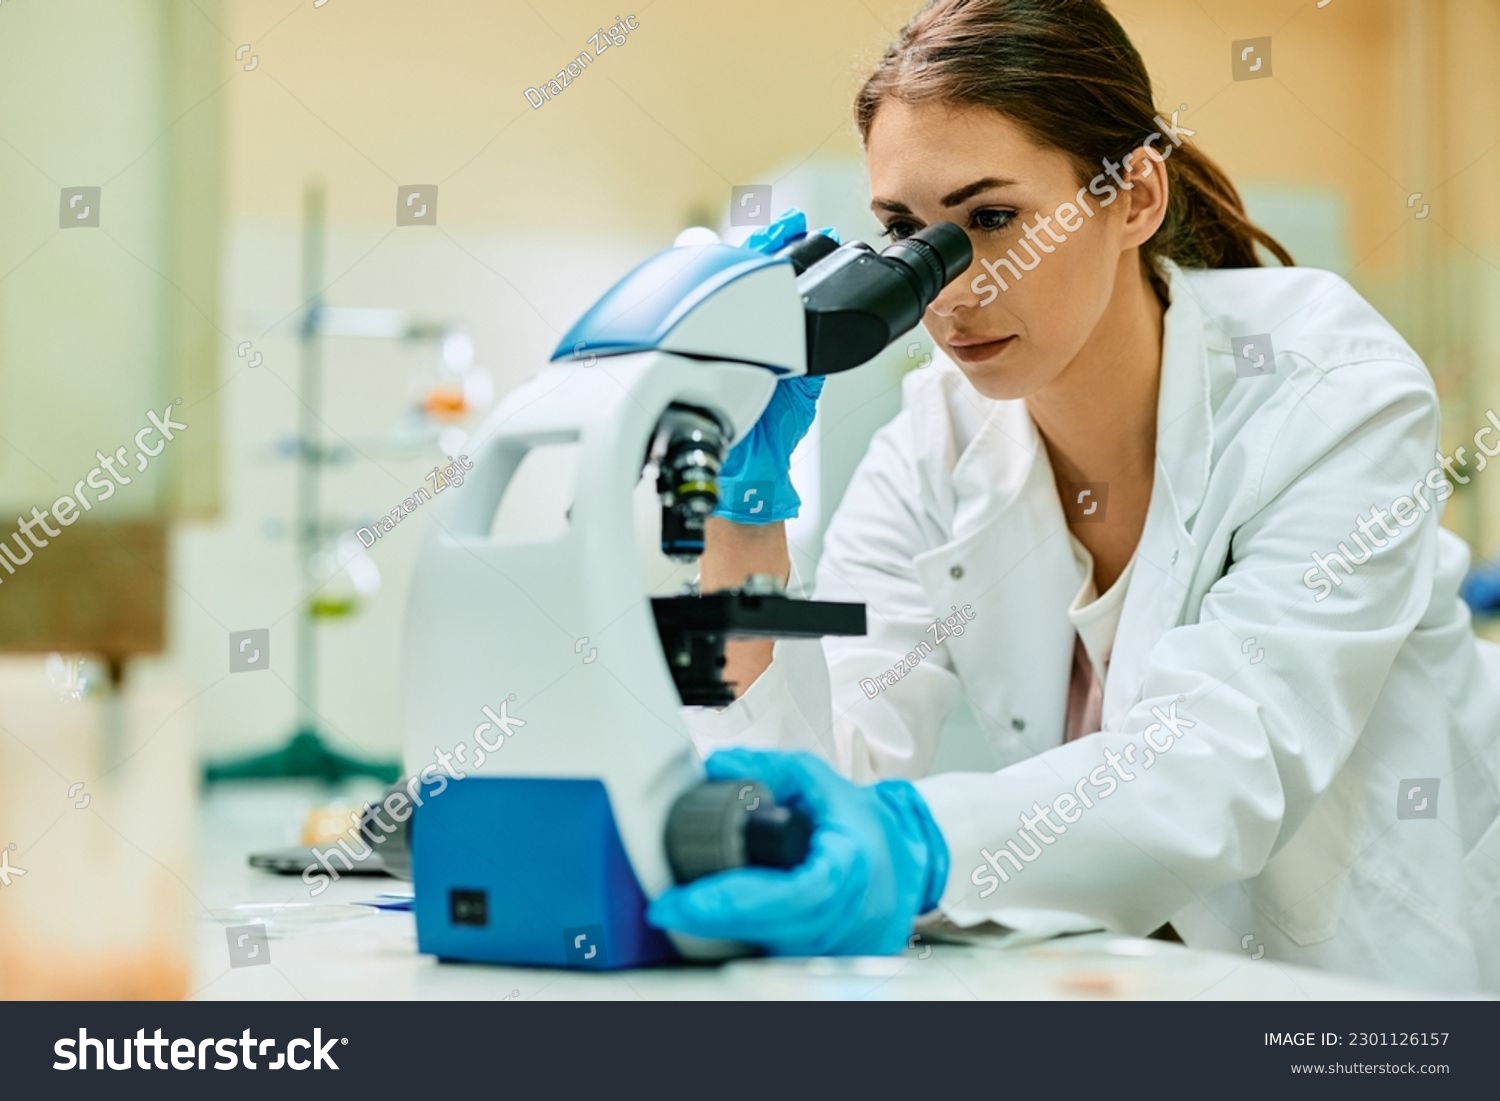 Young science student looking through microscope during her research in laboratory. #2301126157